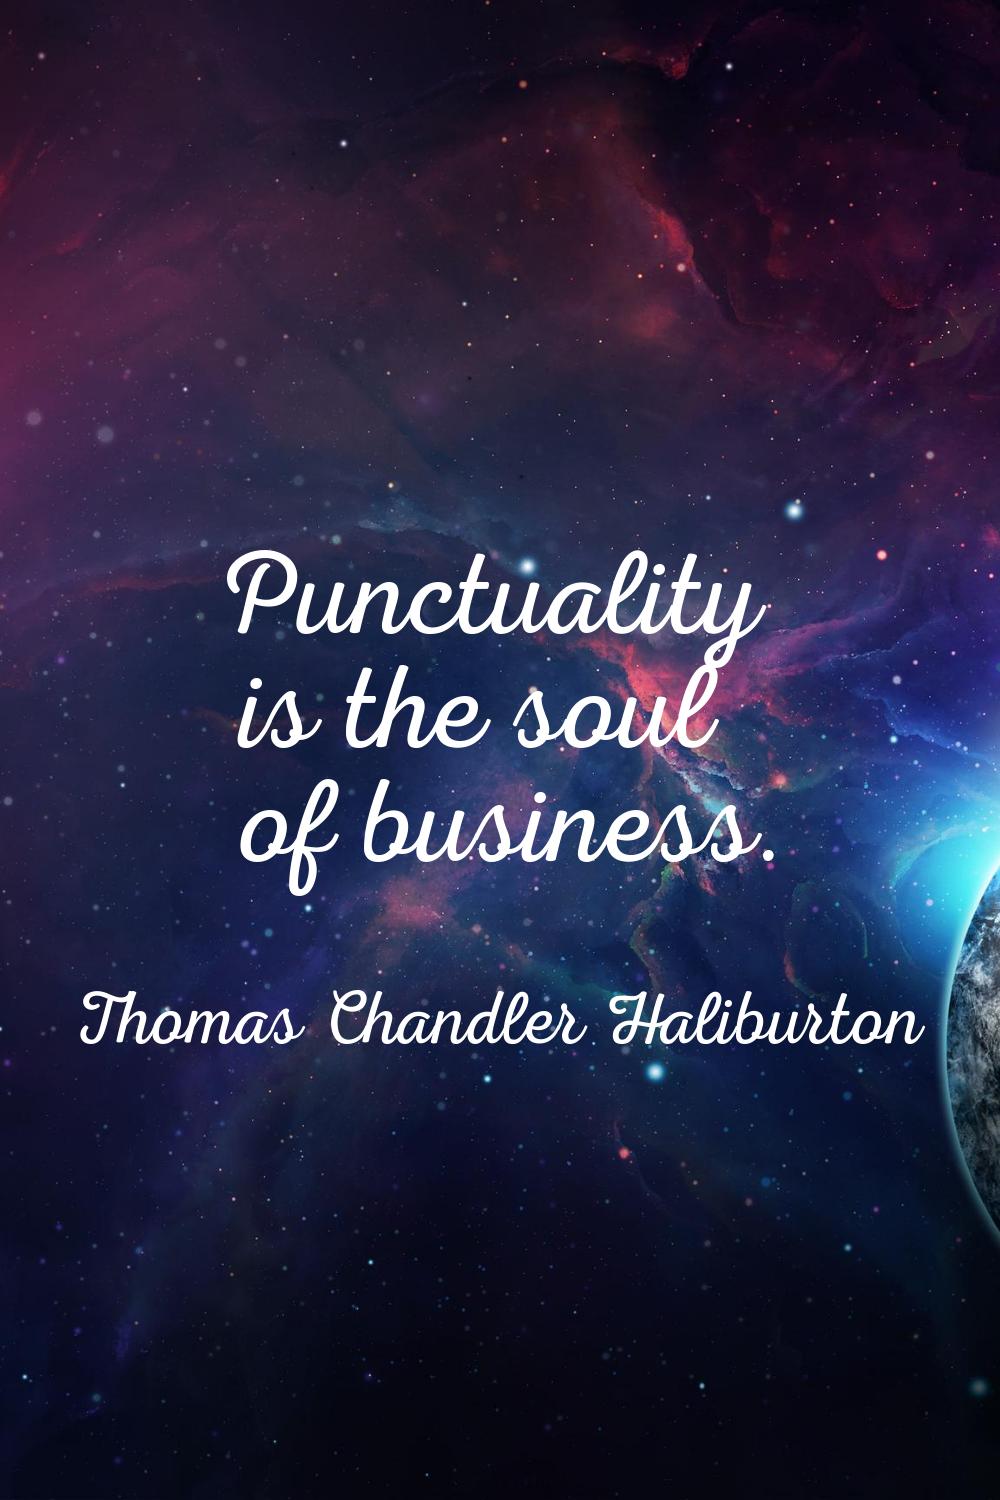 Punctuality is the soul of business.